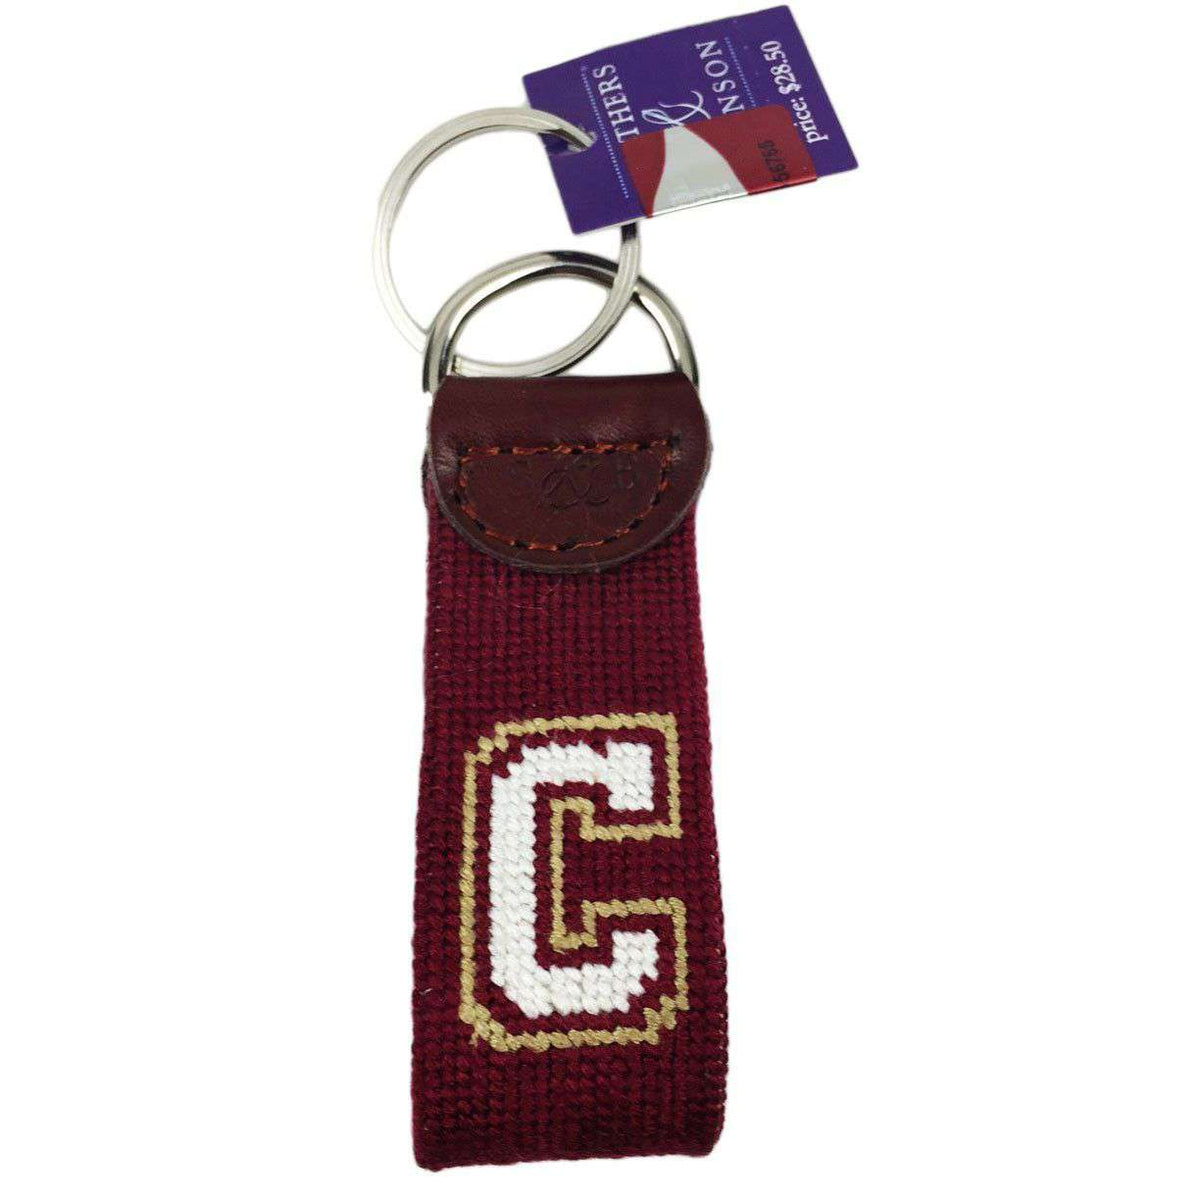 College of Charleston Needlepoint Key Fob in Red by Smathers & Branson - Country Club Prep